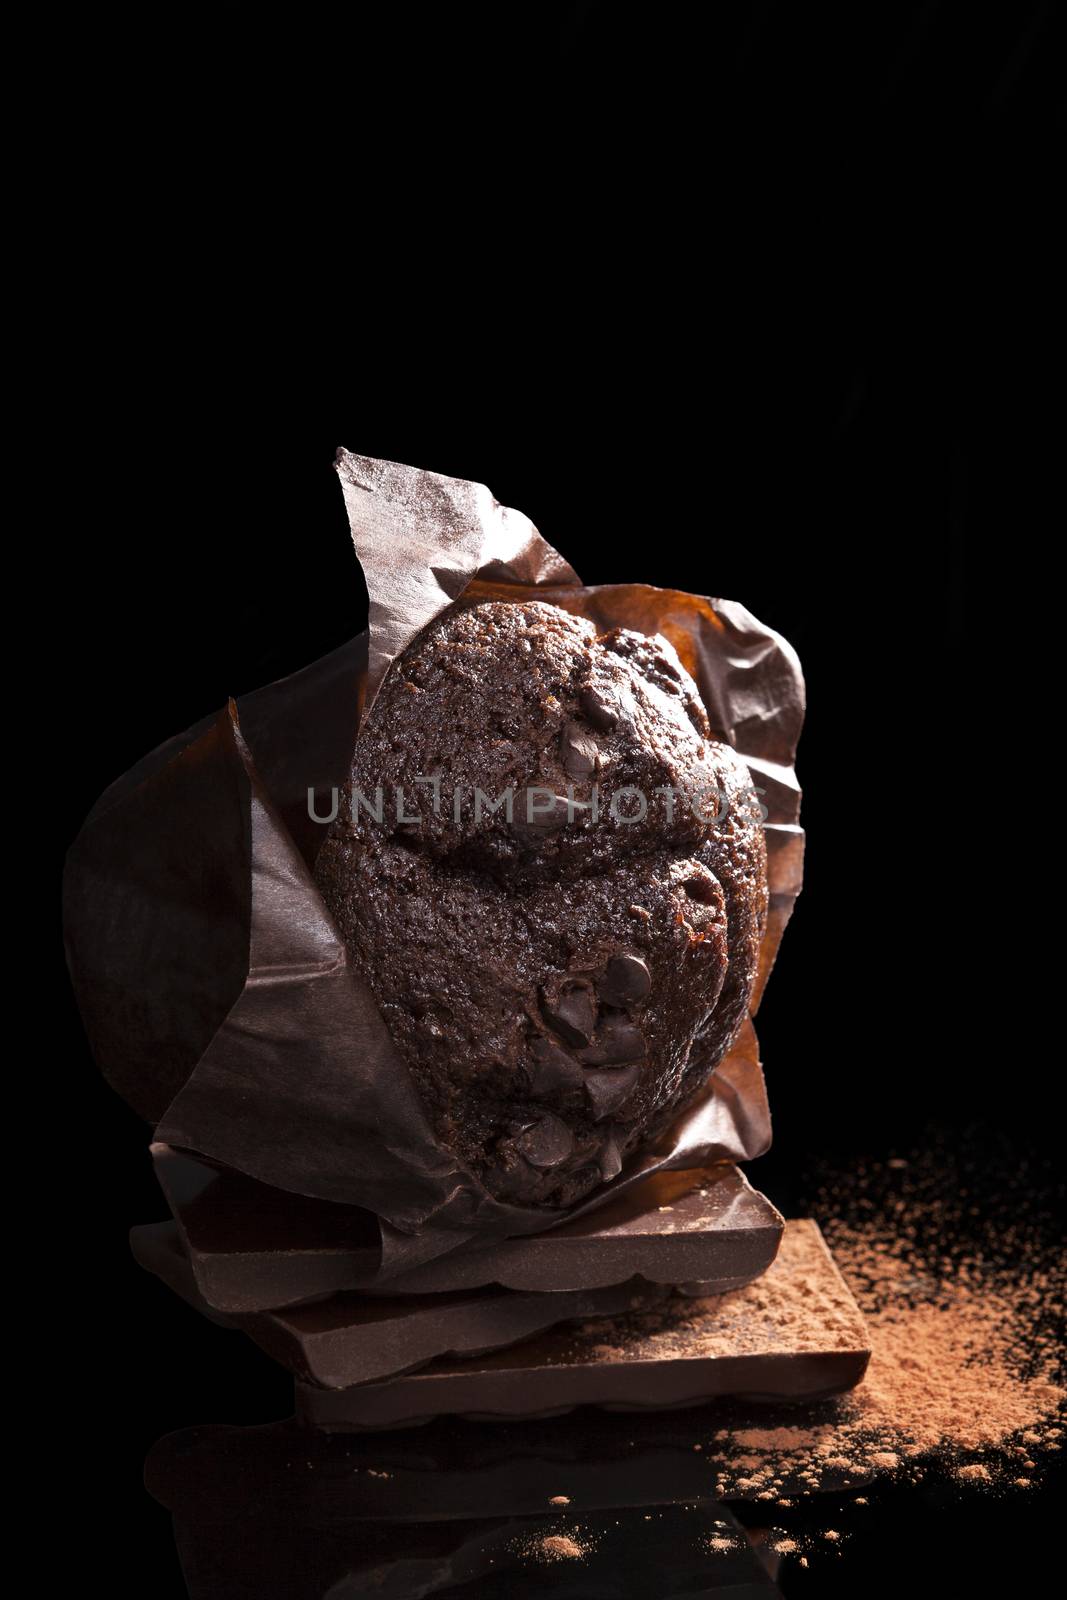 Chocolate muffin, Delicious chocolate muffin on black background with chocolate bar and cocoa powder. Sweet dessert. 